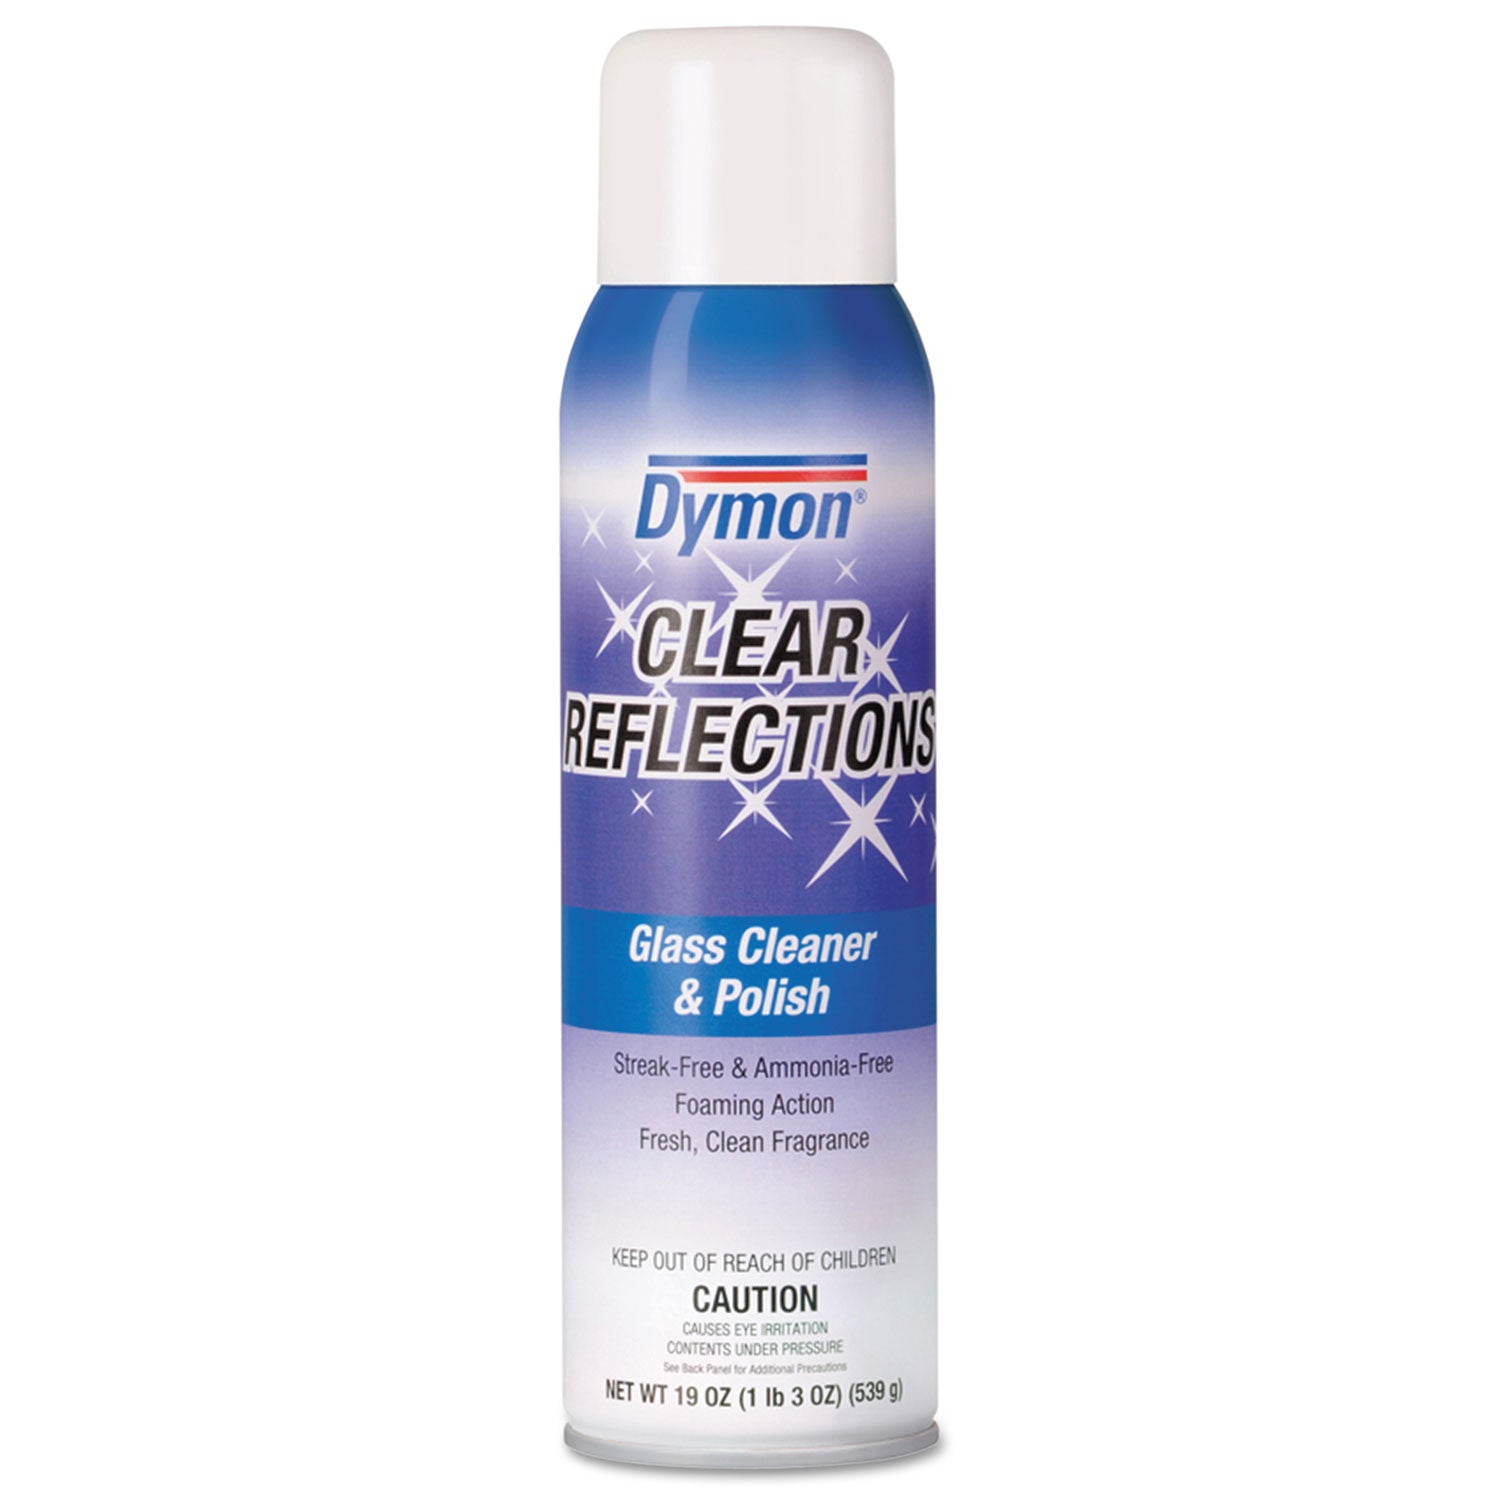 Clear Reflections Mirror and Glass Cleaner, 20 oz Aerosol Spray, 12/Carton - 